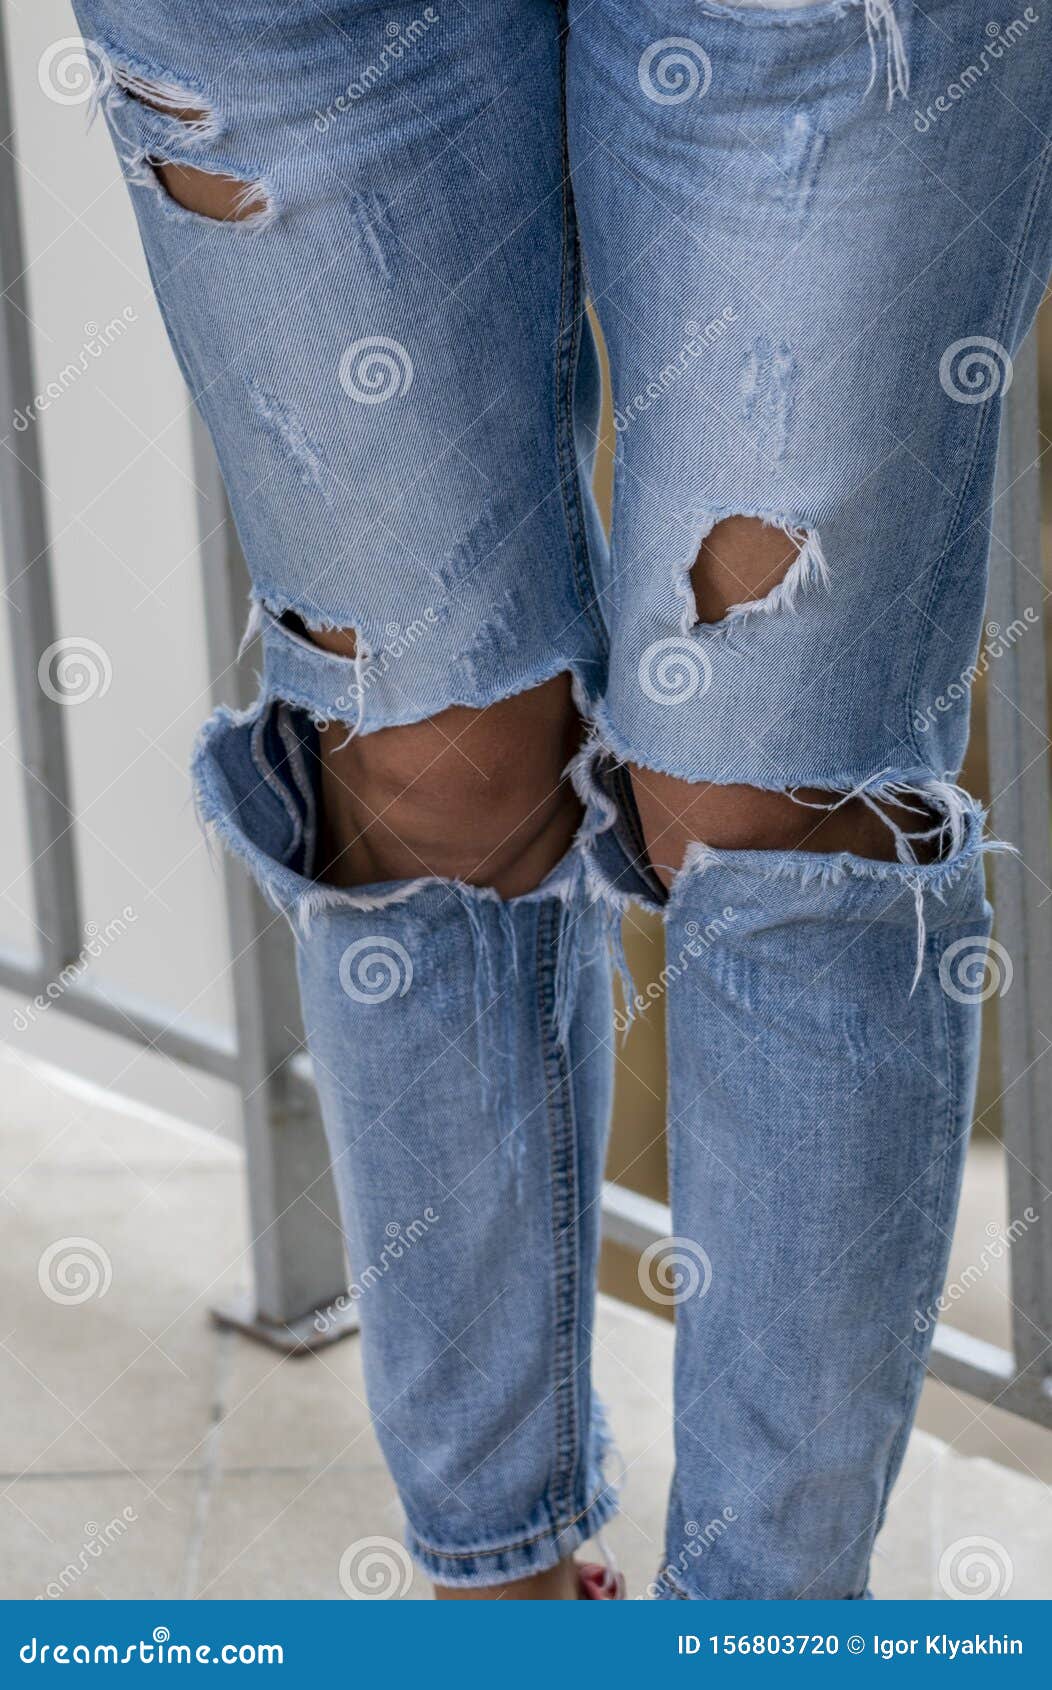 Women`s Legs Dressed in Jeans with Holes Stock Photo - Image of ...